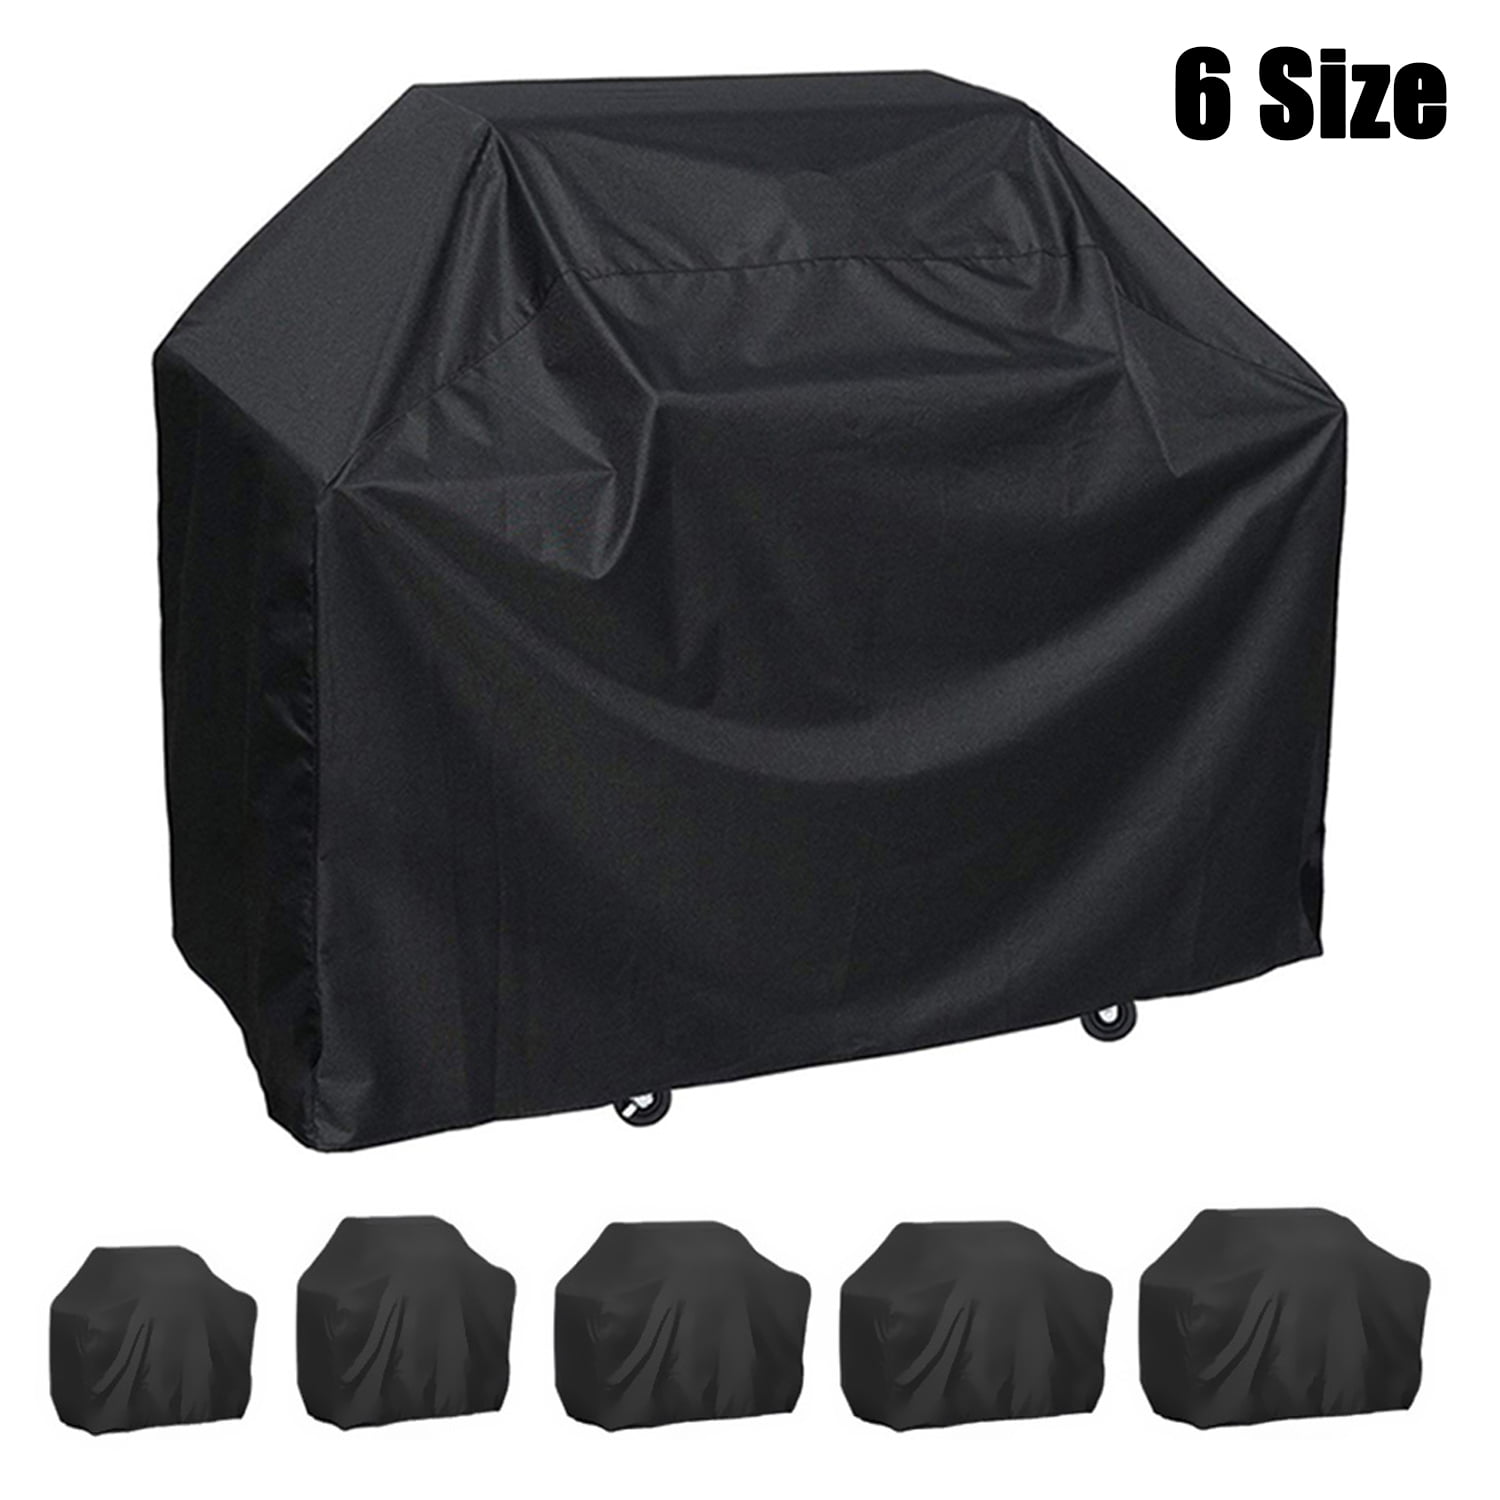 BBQ GAS GRILL COVER LARGE BARBECUE WATERPROOF OUTDOOR HEAVY DUTY PROTECTION 